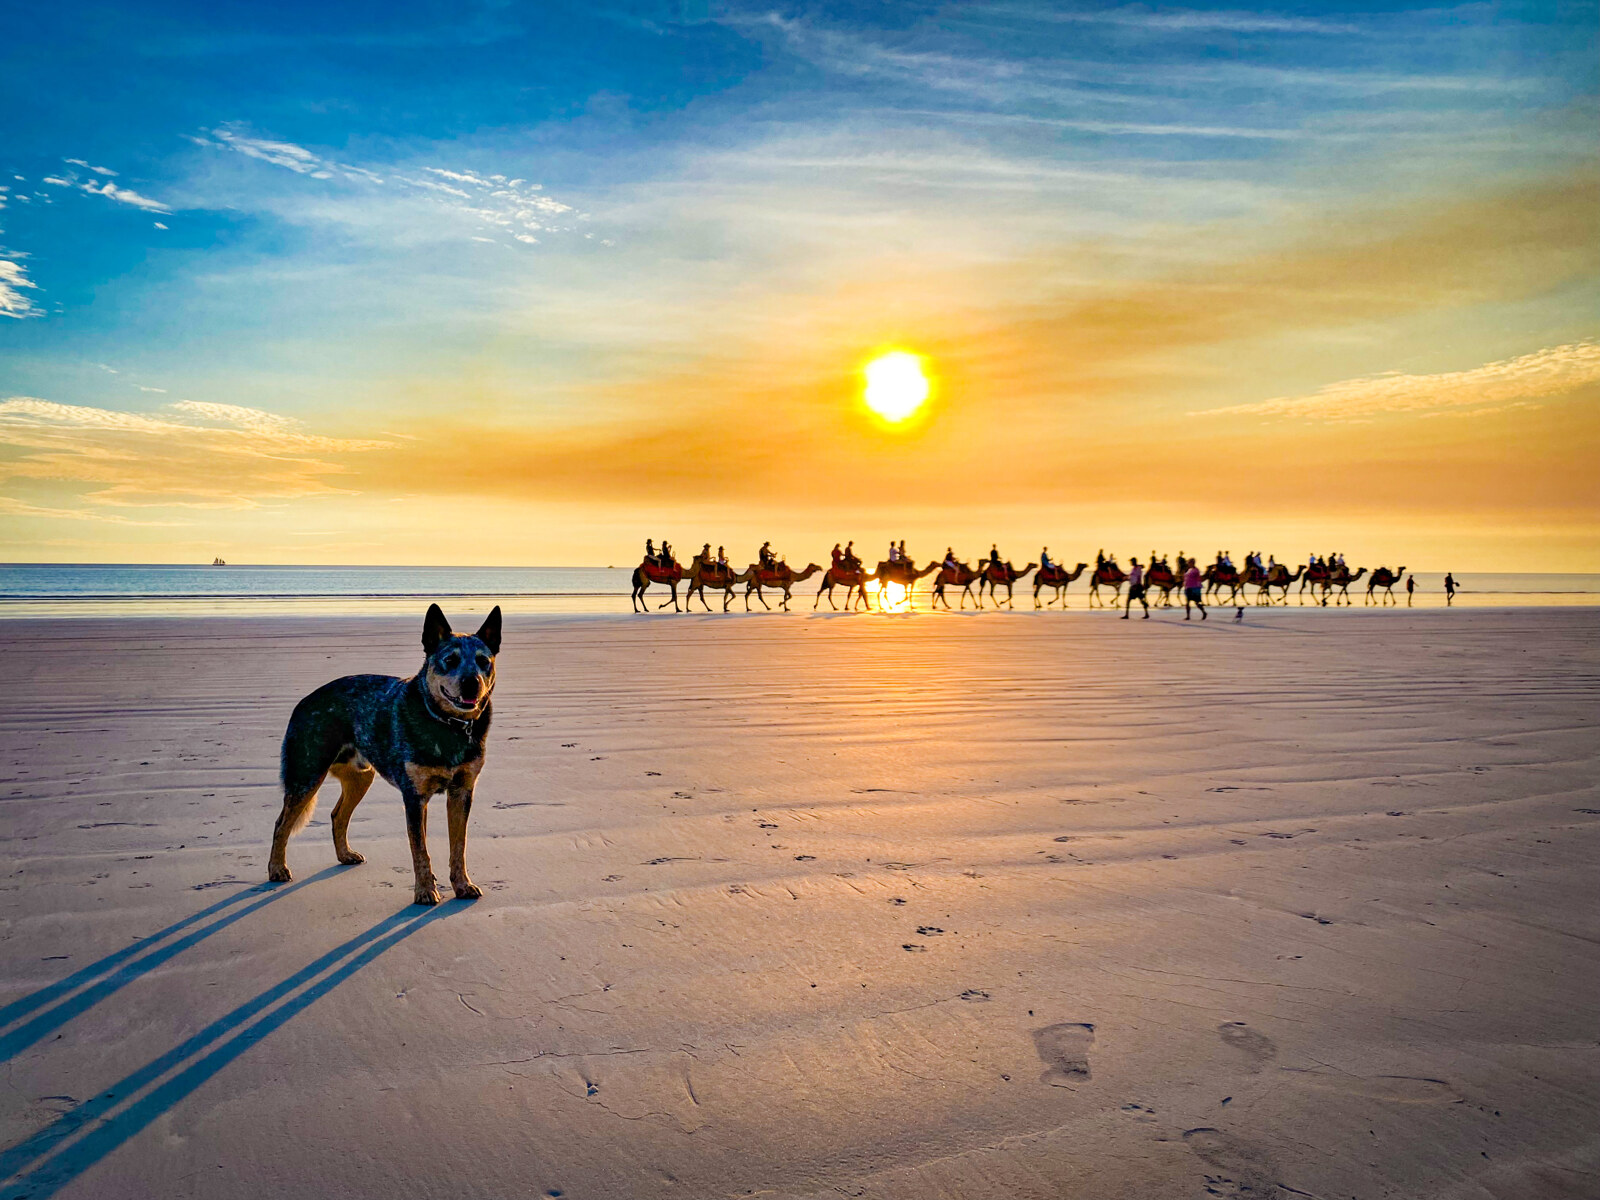 A Blue Heeler dog on Cable Beach Broome at sunset with a row of camels in the background